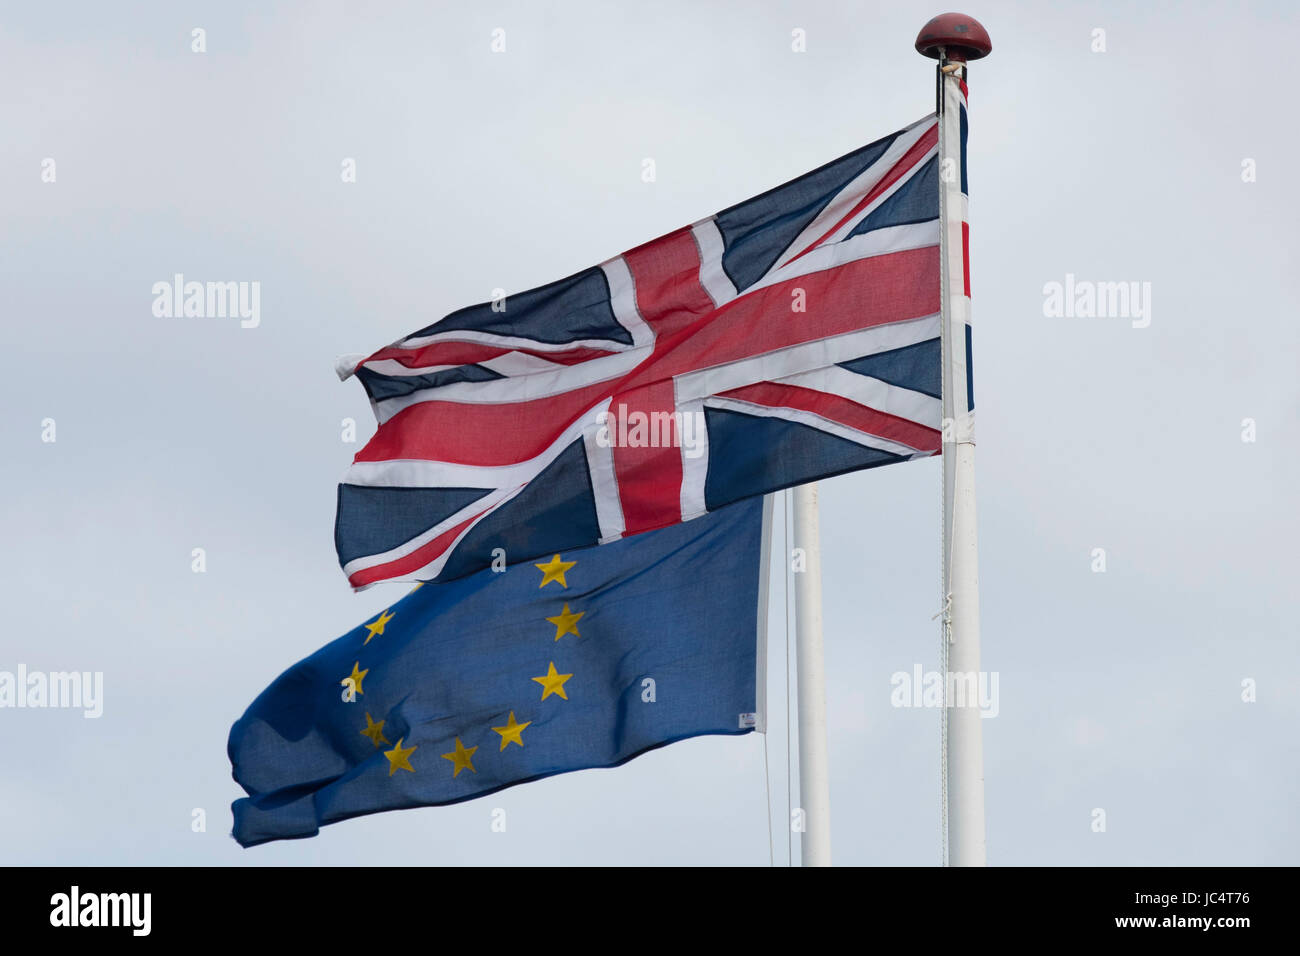 European Union and British Union Jack flags blow in the wind. The UK voted to leave the EU in a referendum. Stock Photo